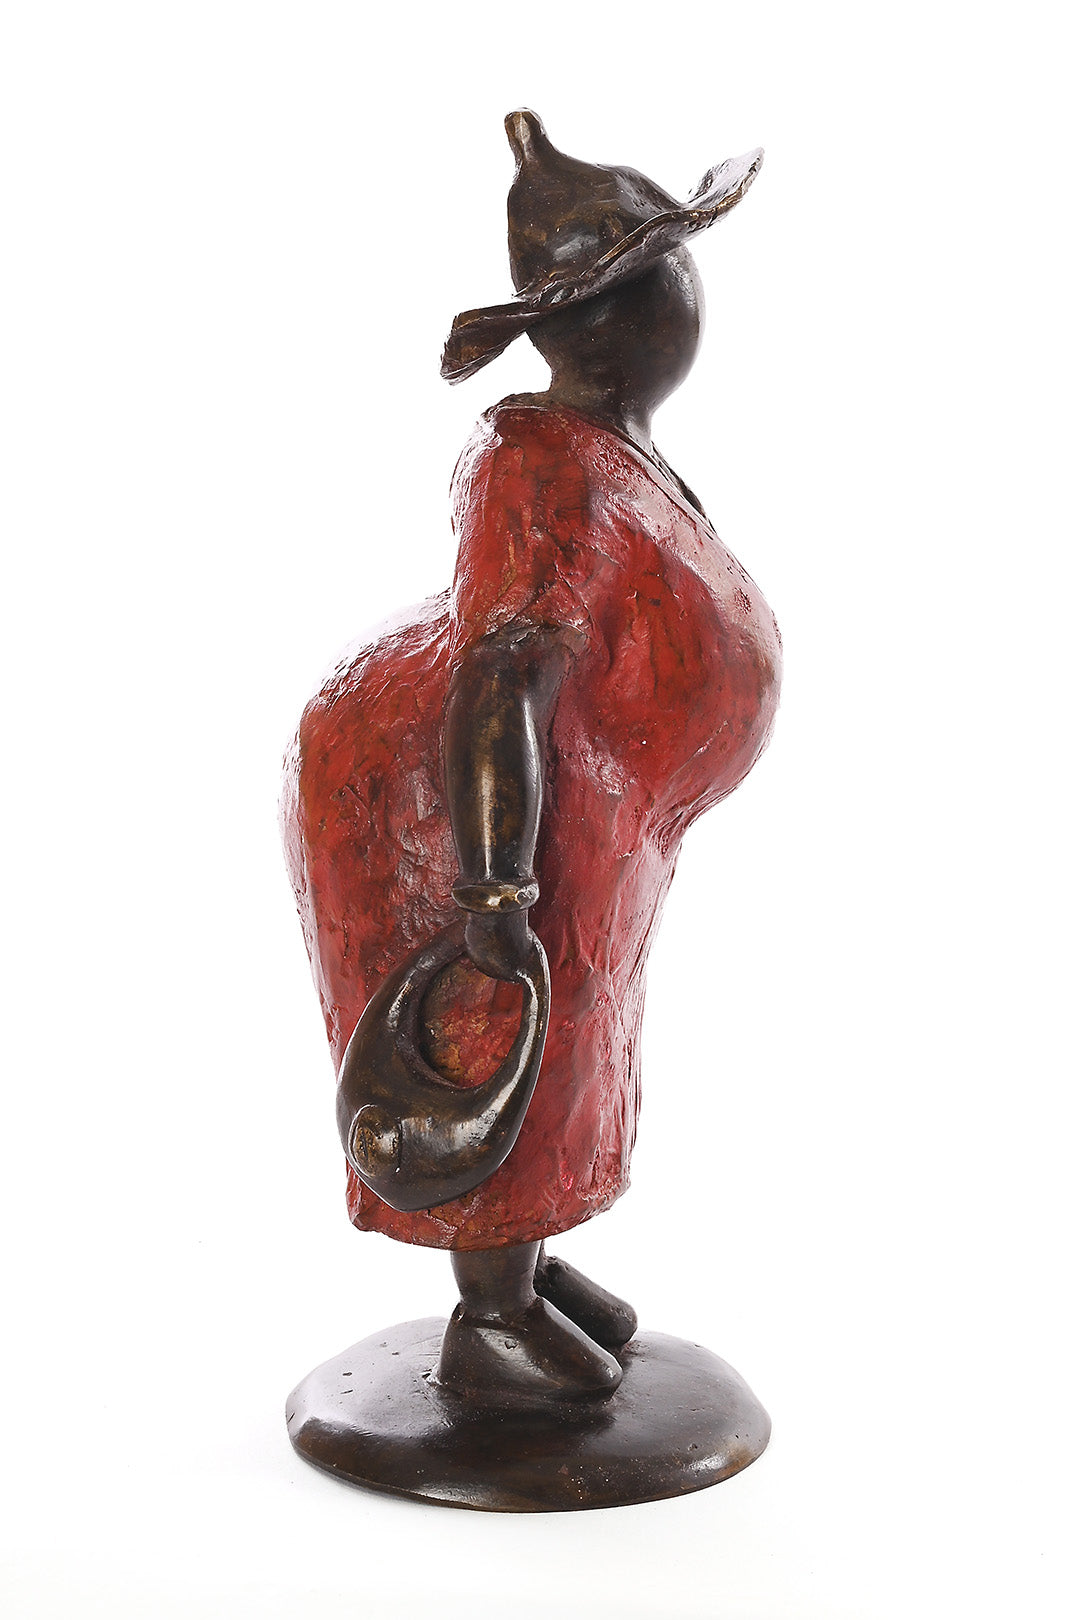 "Granny" One of a Kind Lost Wax Bronze Sculpture